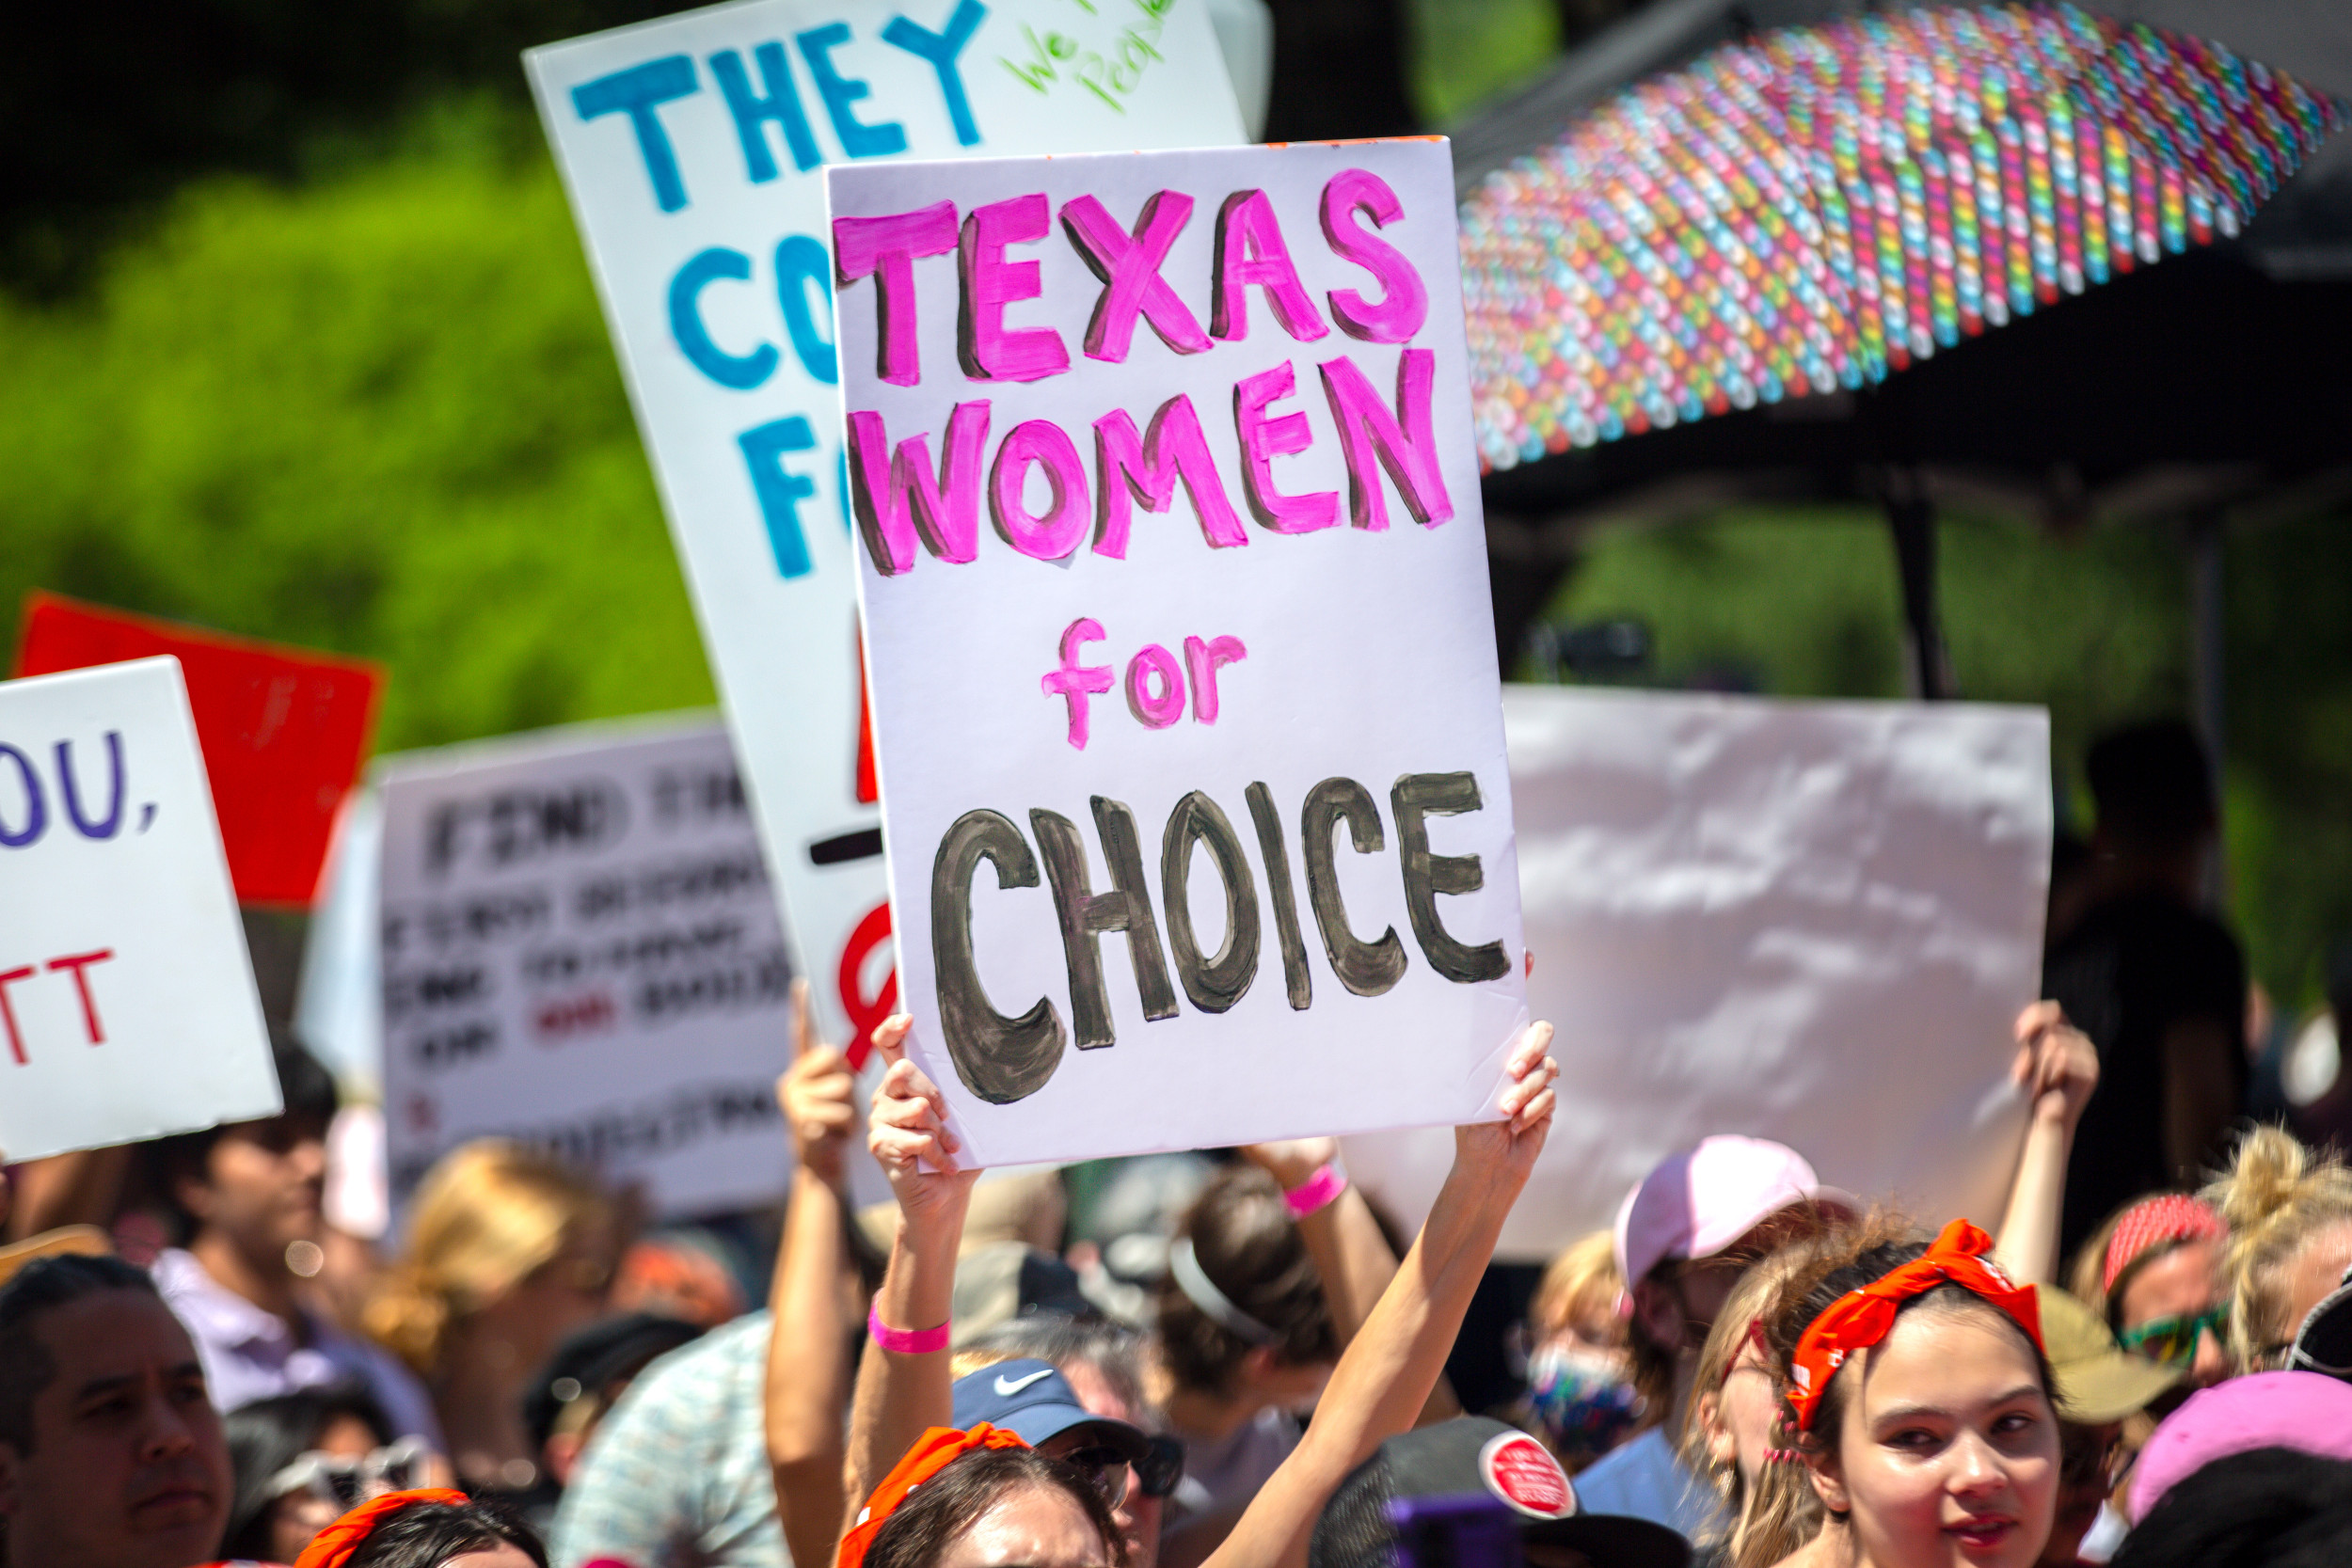 Texas saw spike in number of babies born after abortion ban, study says